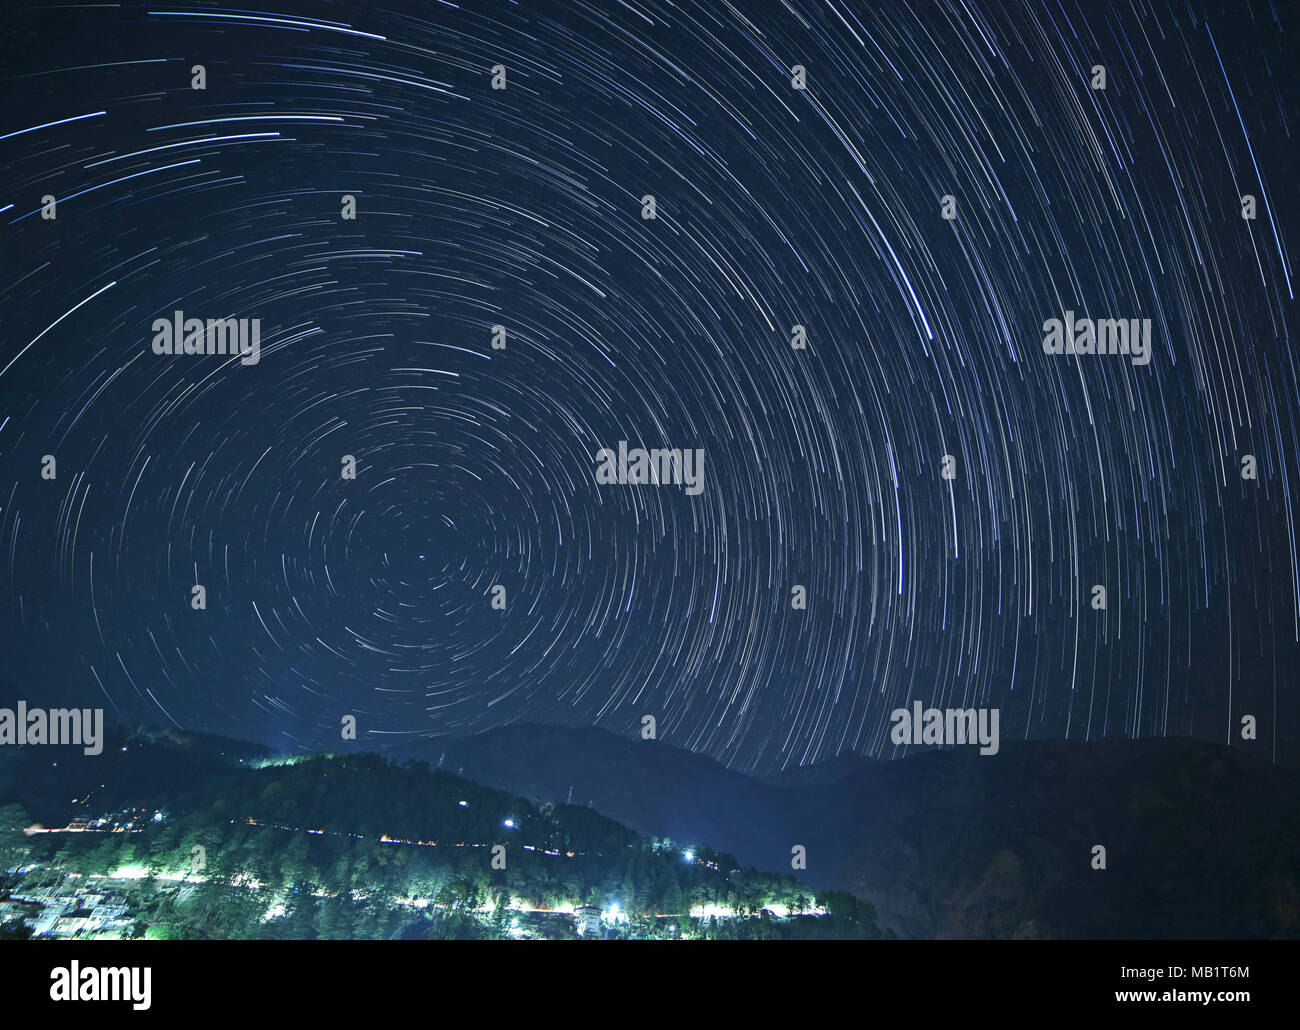 McLeod Ganj at night with star trails in sky above mountains, India Stock Photo